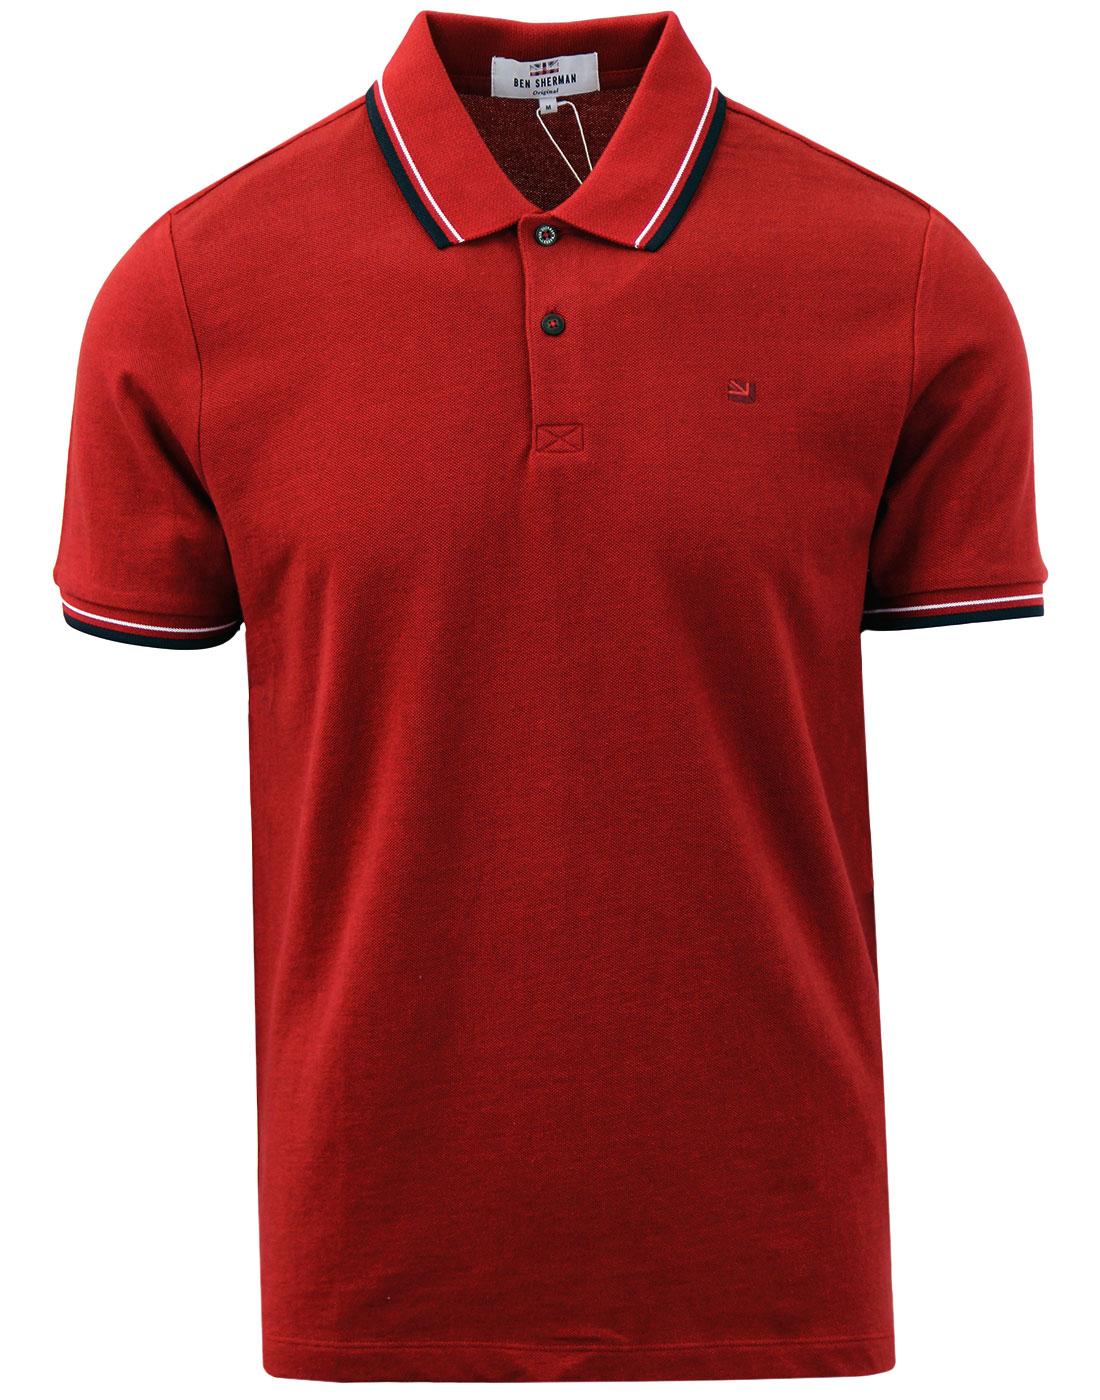 BEN SHERMAN Romford Retro Tipped Pique Polo Top in Red